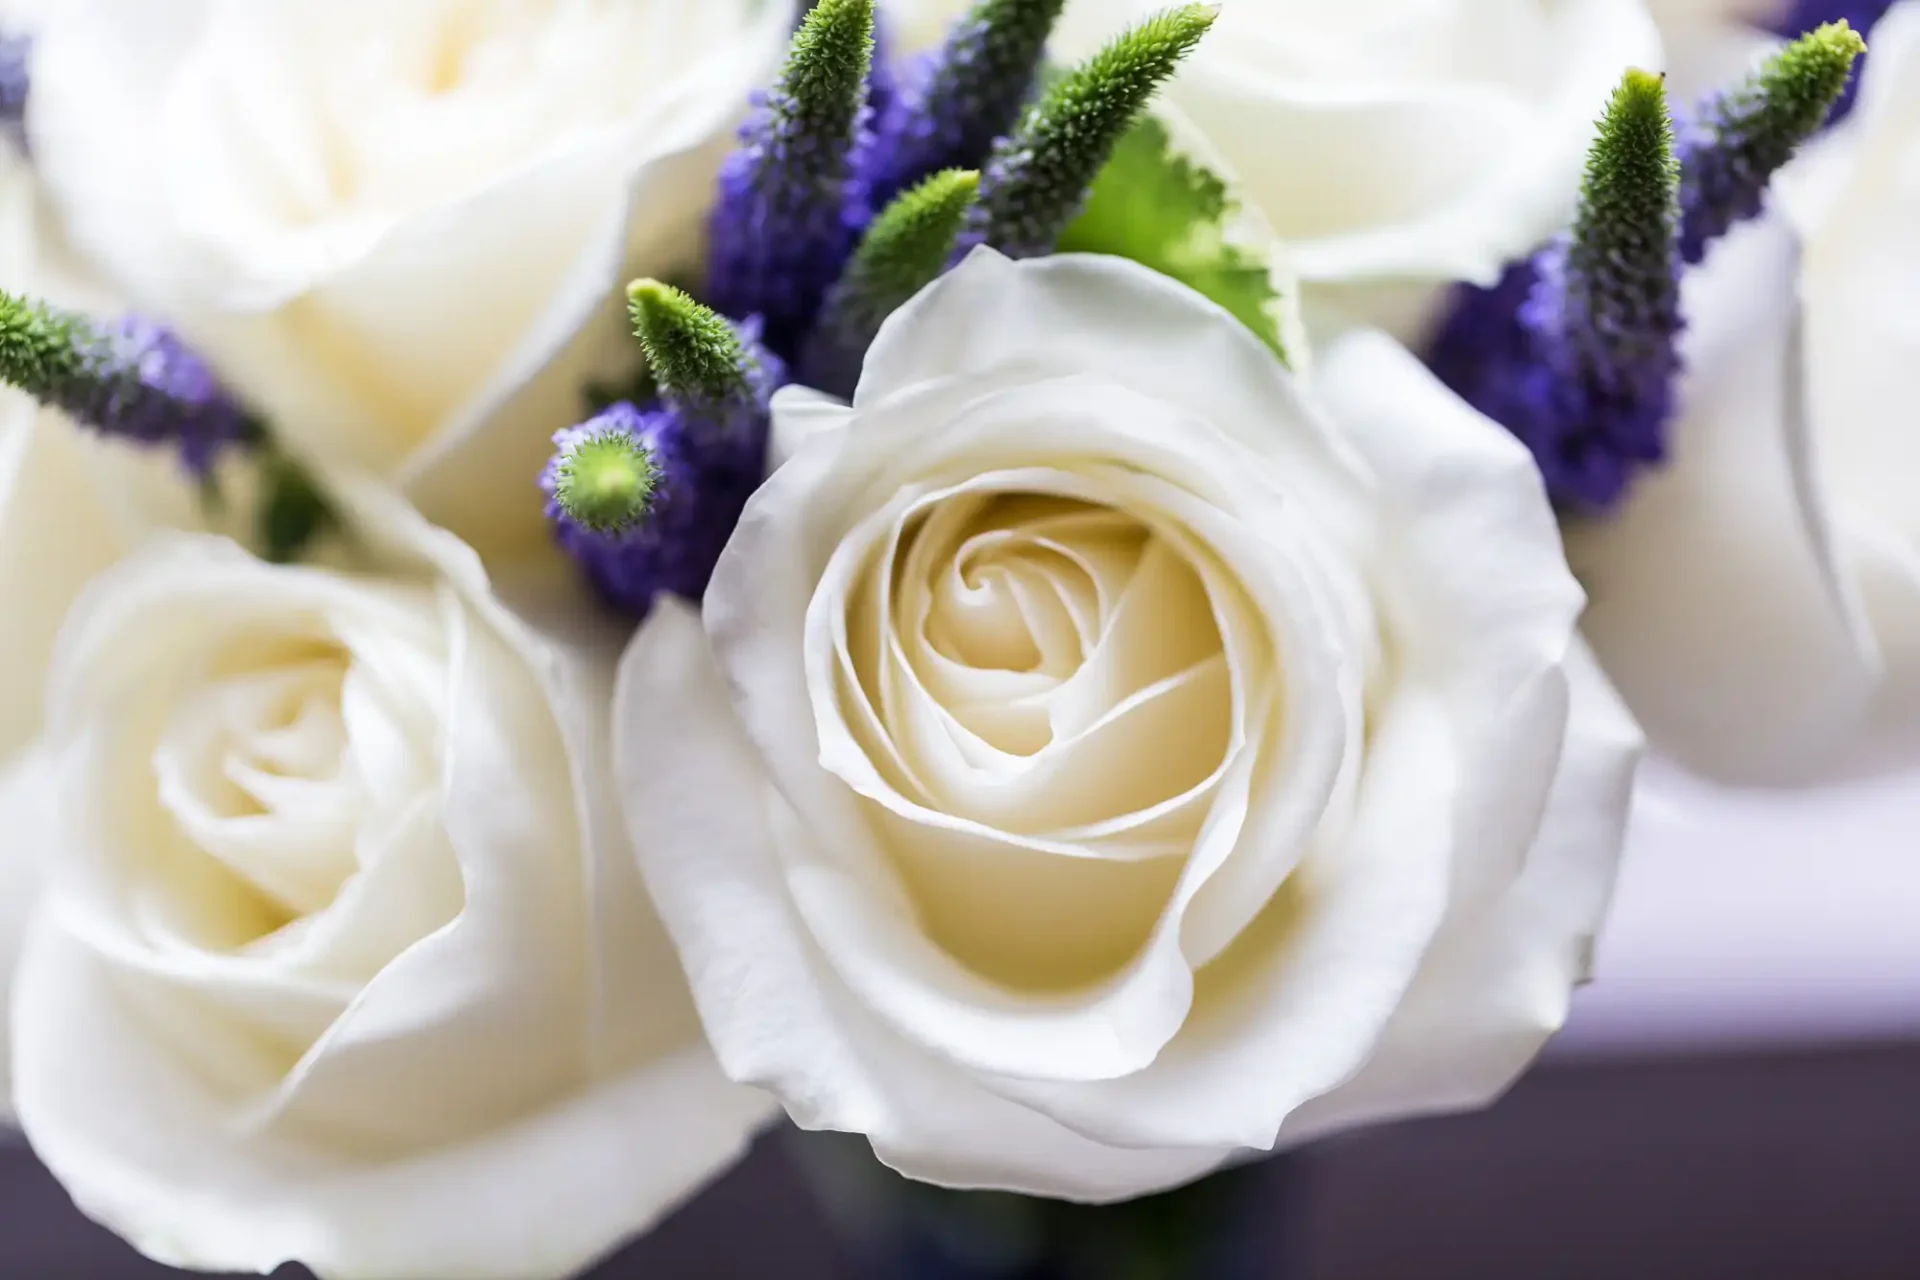 Close-up of white roses and purple flowers, highlighting the delicate textures and soft colors.